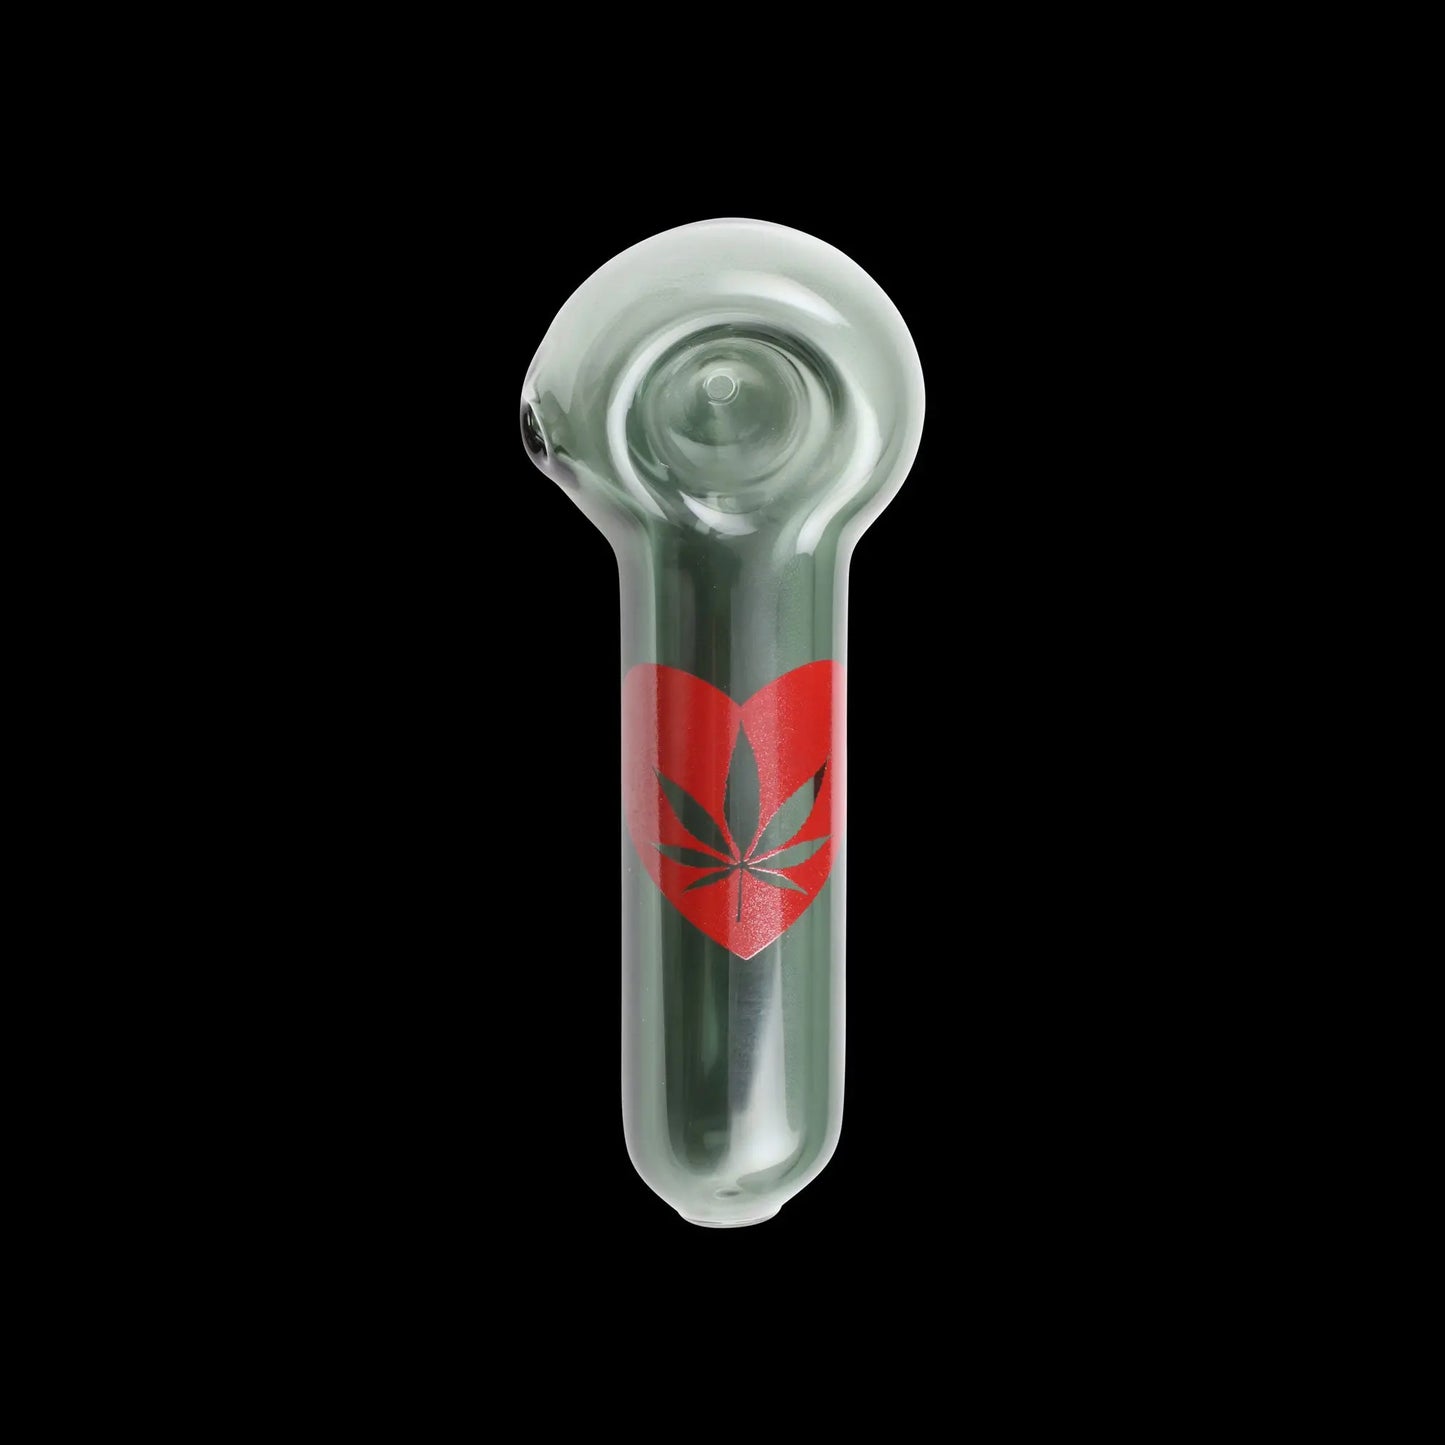 I Love Cannabis BOL Glass Pipe by Chameleon Glass